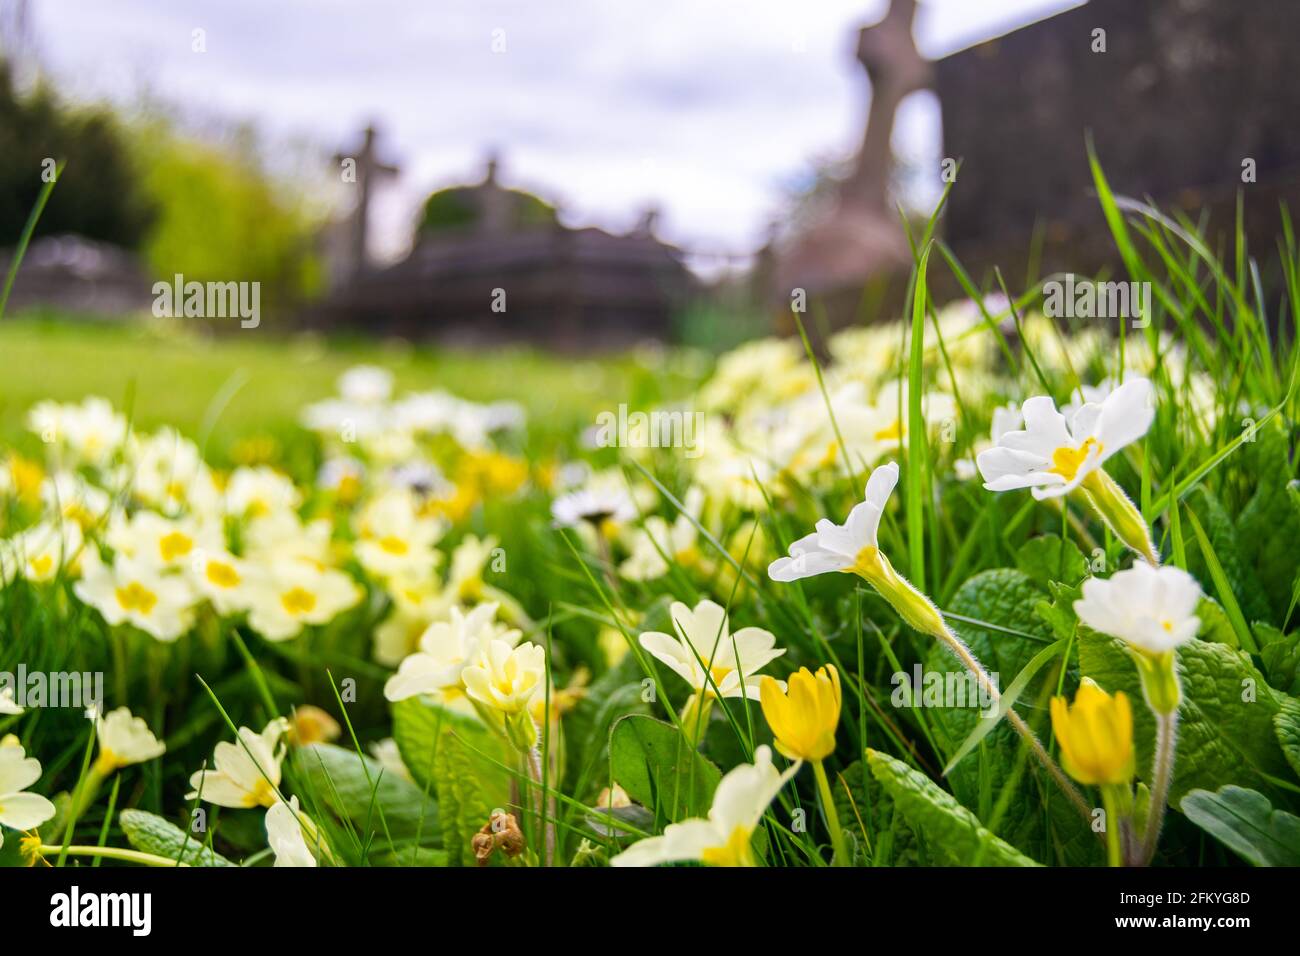 White and yellow Primula vulgaris known as the common primrose growing wildly on a cementery, flowers of Primulaceae with crosses in background Stock Photo